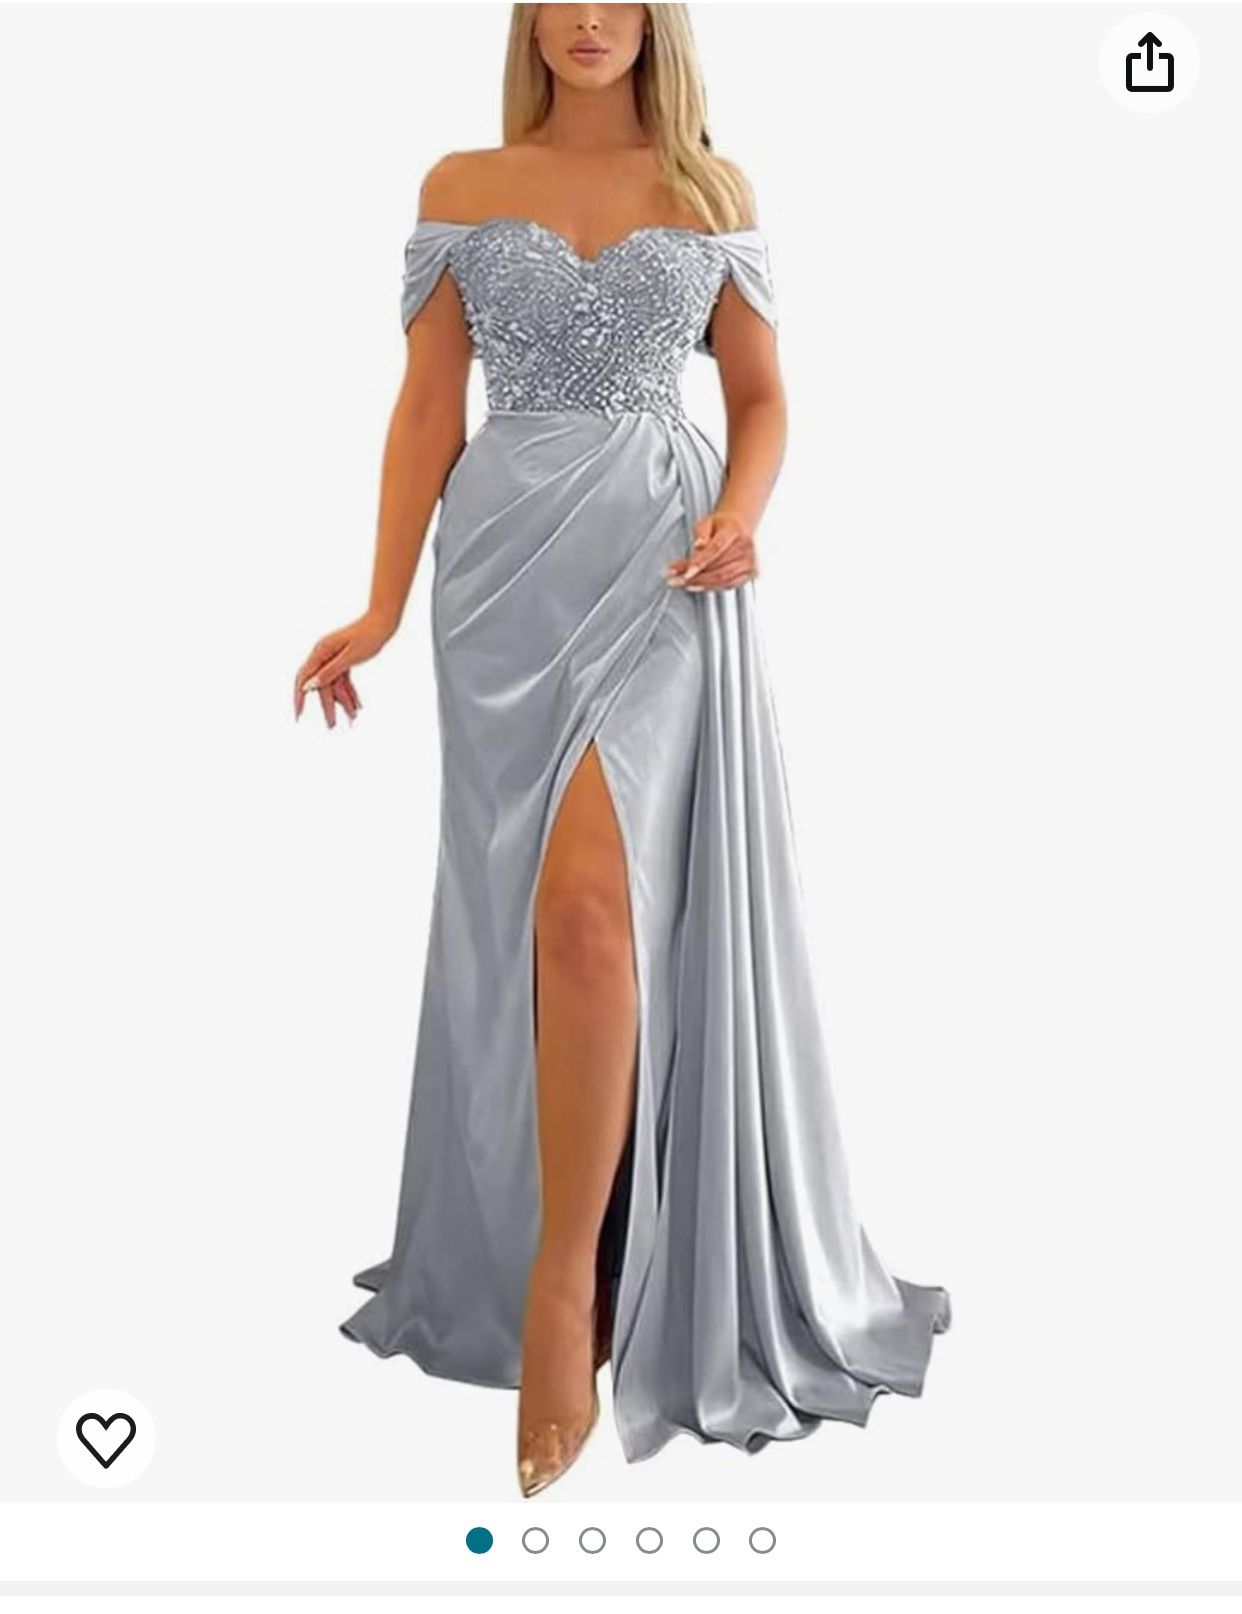 Off The Shoulder Mermaid Prom Dresses Beaded Bridesmaid Dresses Long Formal Evening Party Gowns for Women High Split